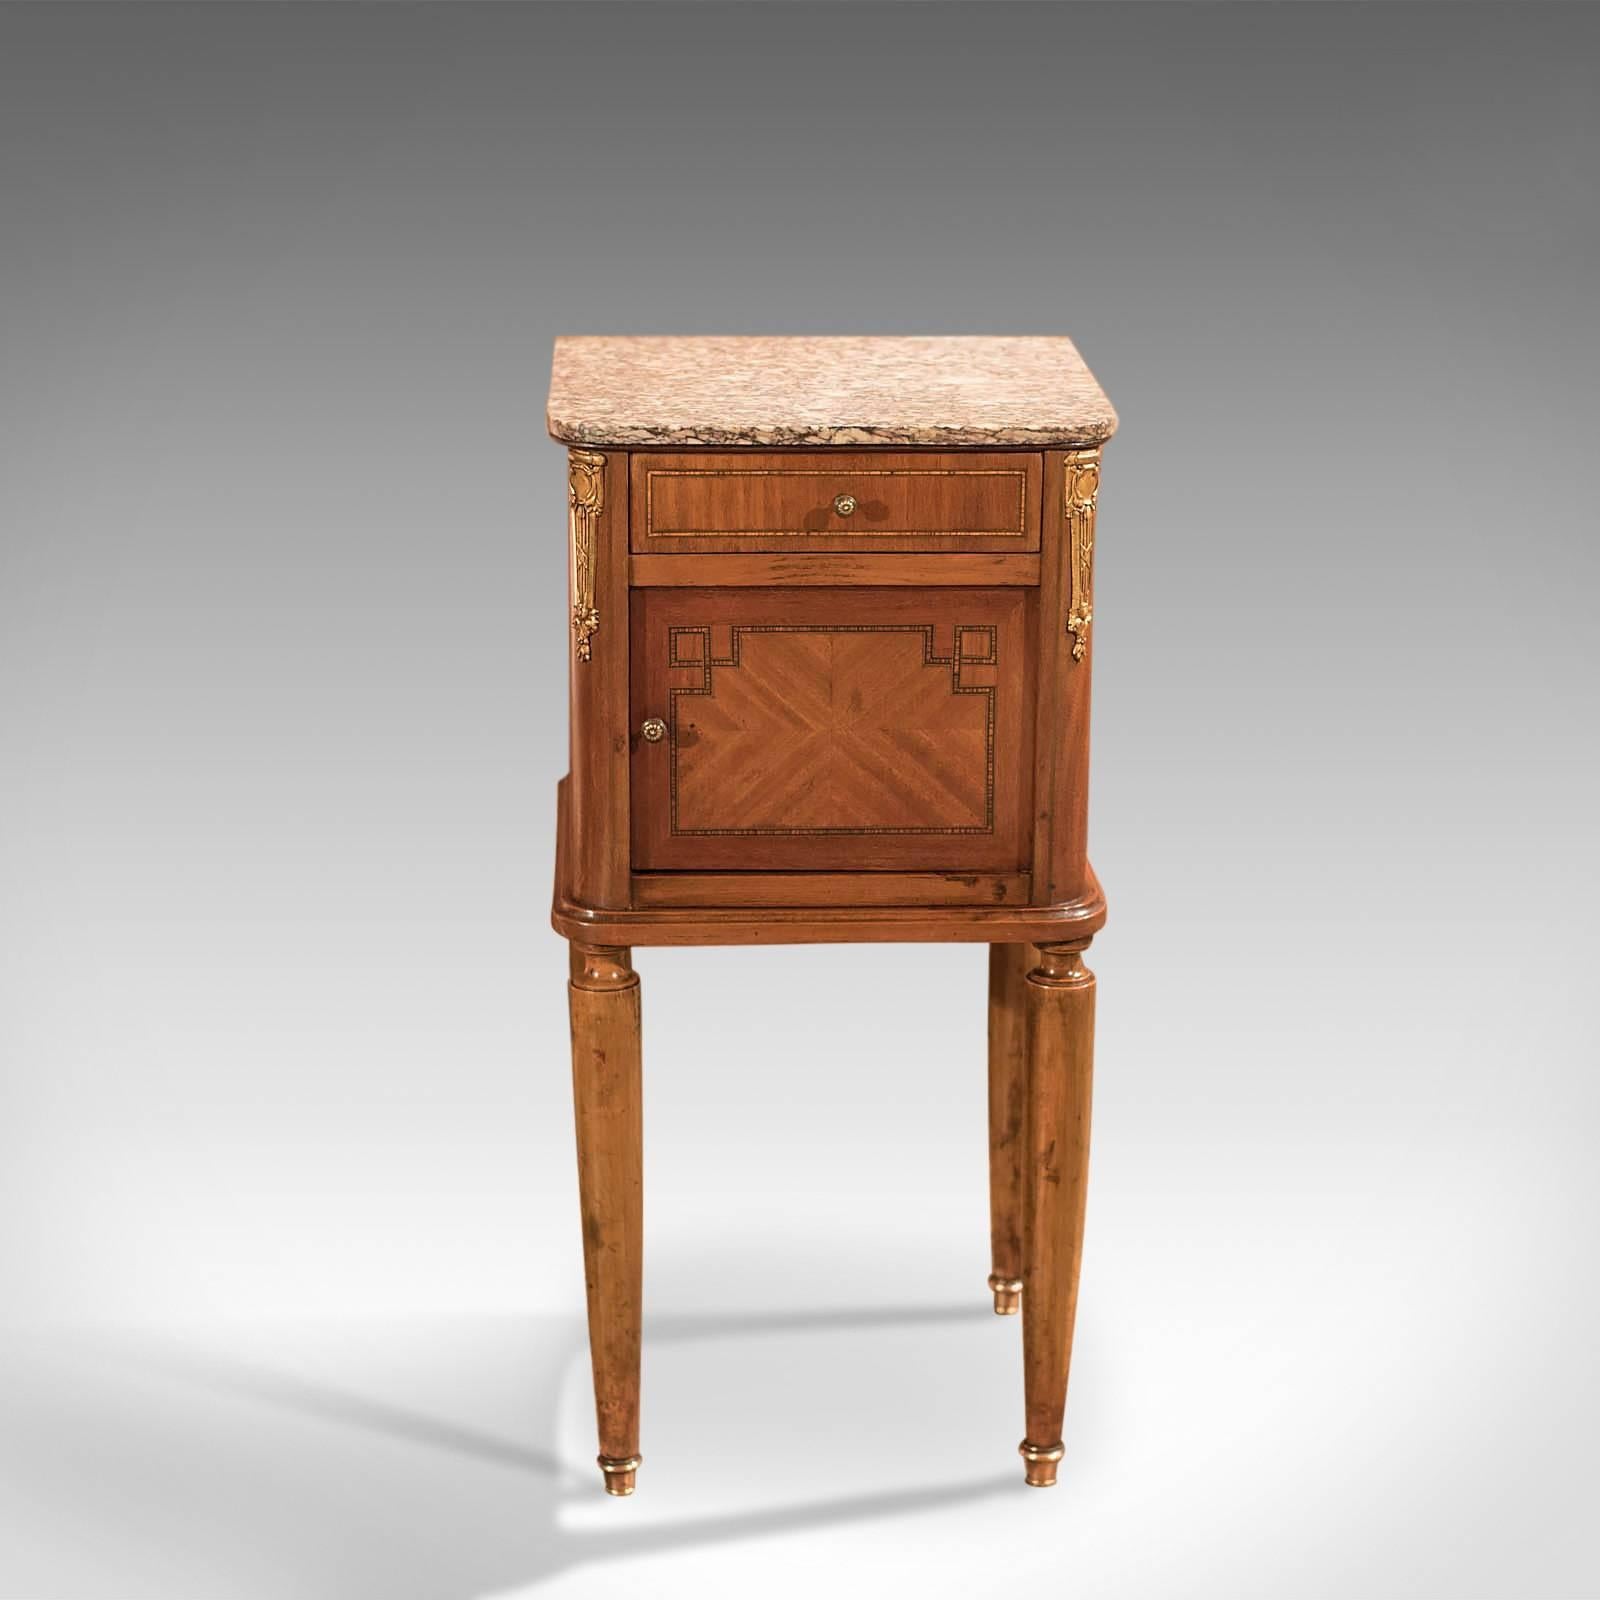 This is an antique bedside table, a mahogany pot cupboard, or nightstand, dating to the end of the 19th century.

Raised on turned, tapered fruitwood legs. The feet capped in polished bronze shoes, this fine example of a Victorian pot cupboard has